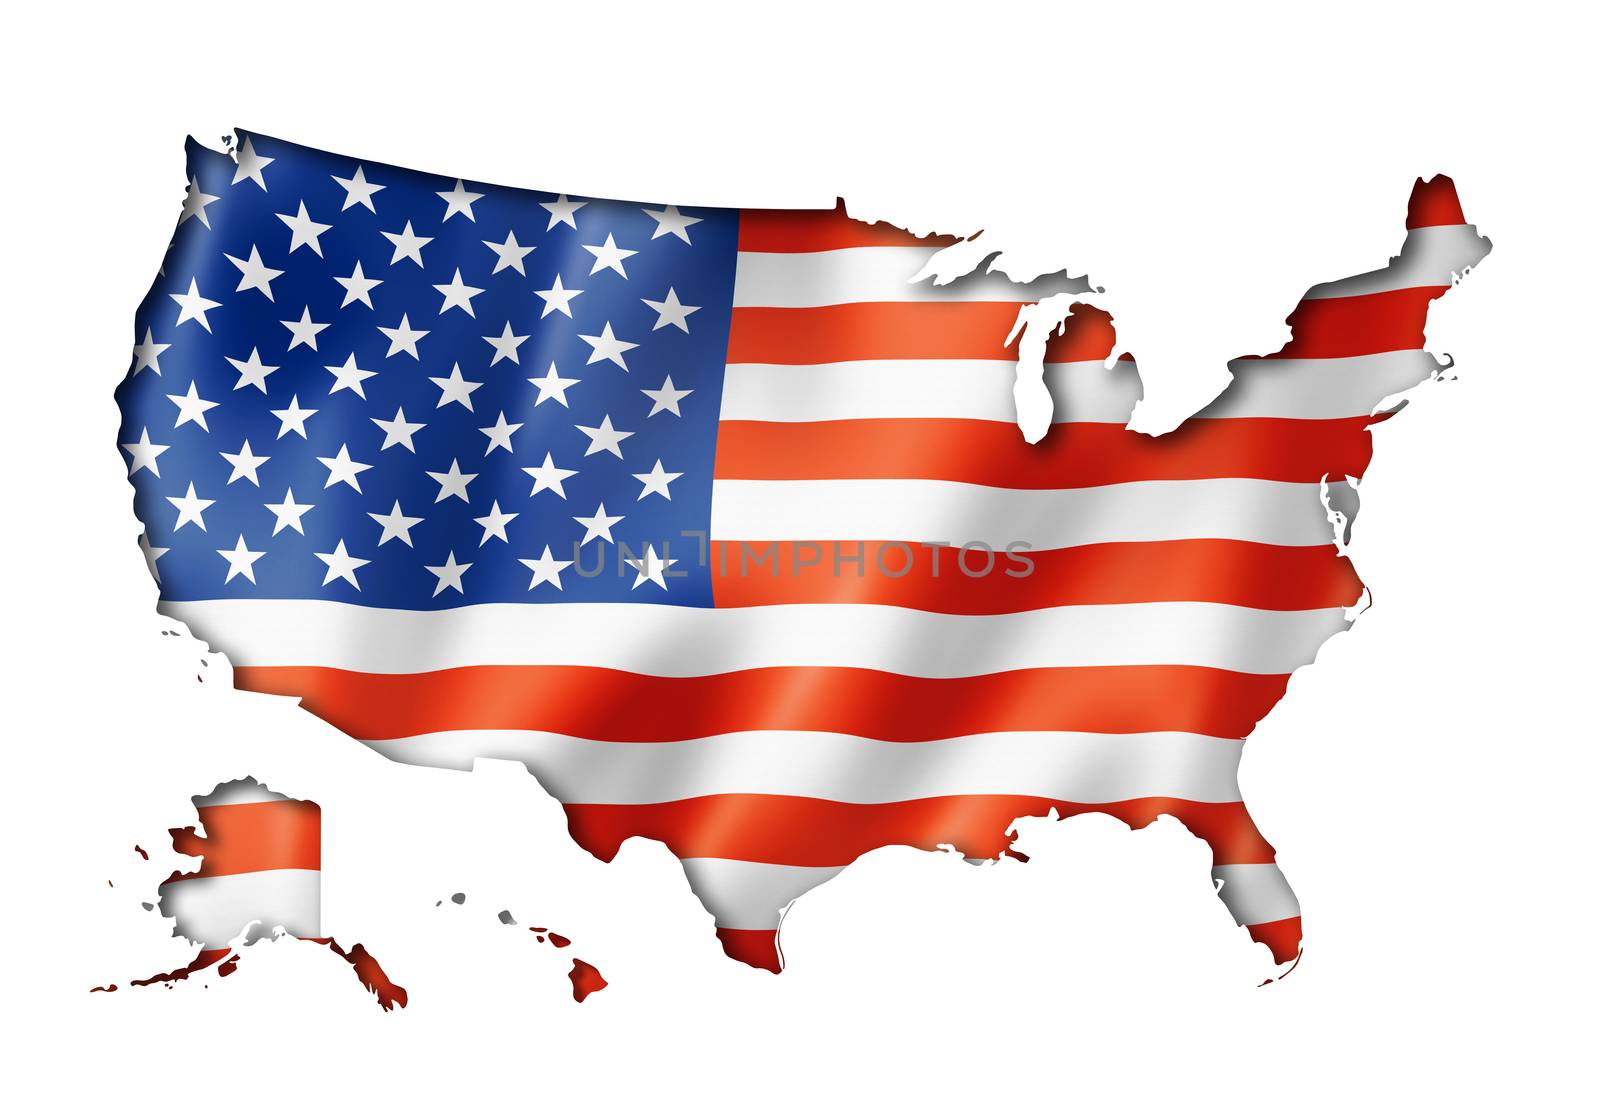 United States flag map by daboost